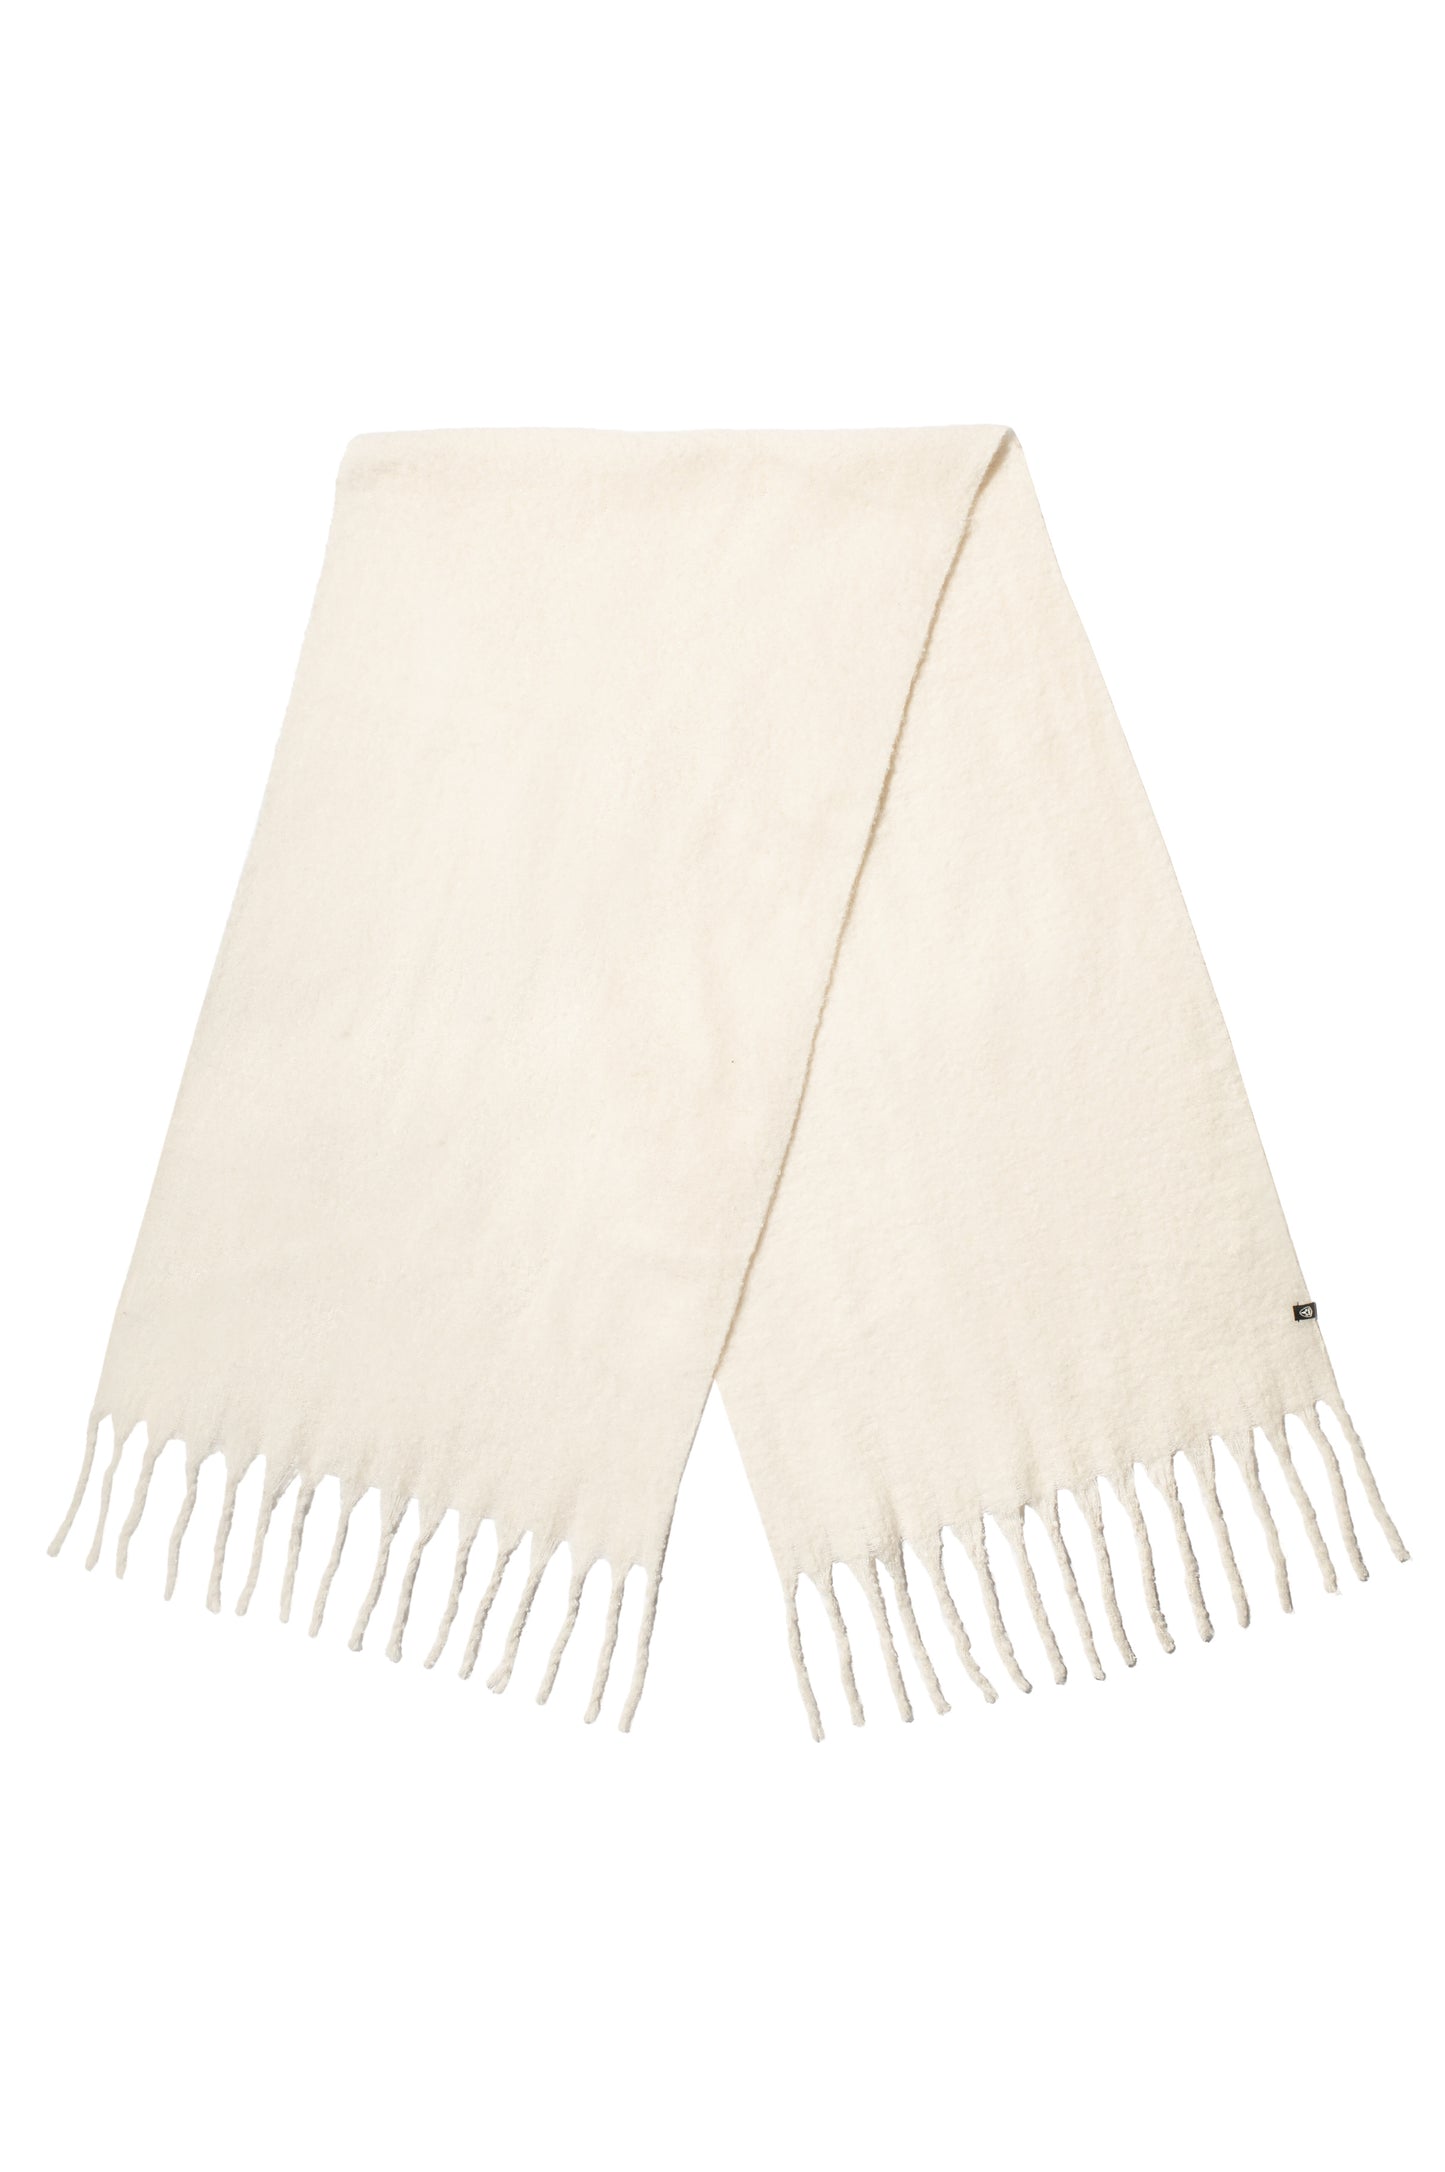 Unisex scarf with fringed ends in Chalk